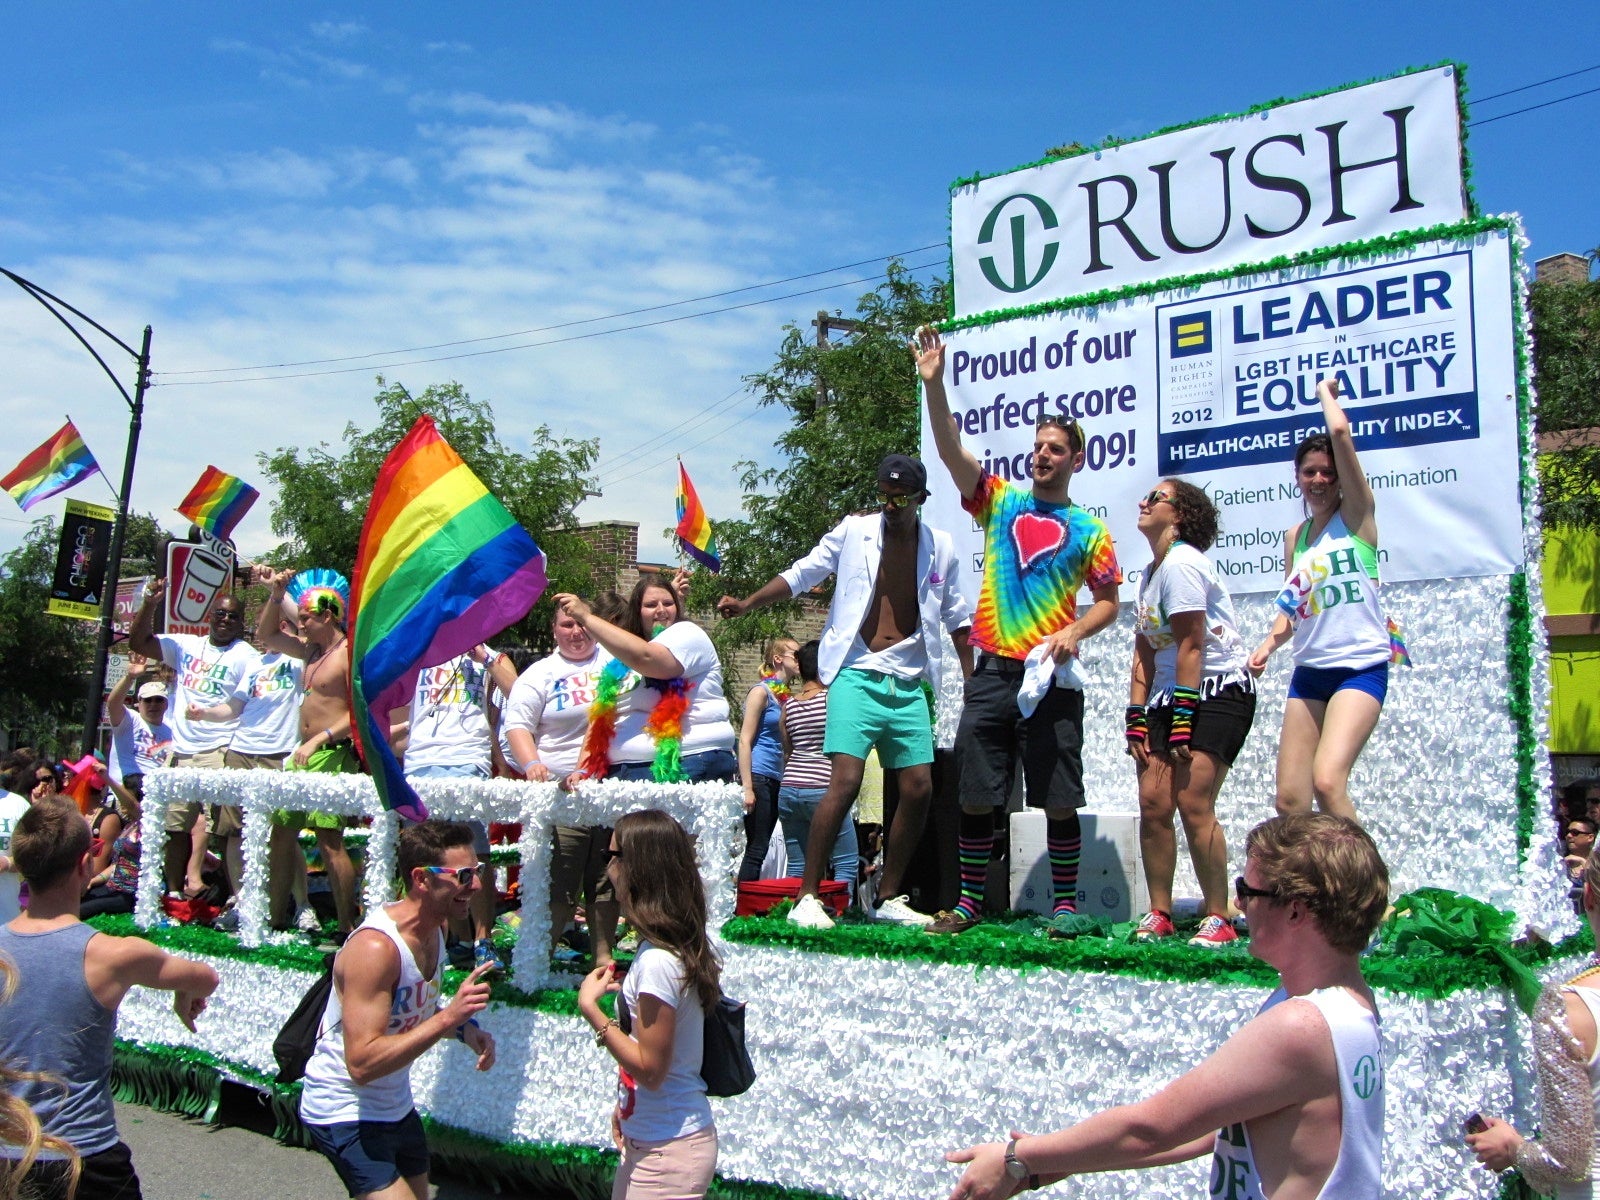 White float on pride parade with young people waving rainbow flags and the logo of the Rush University Hospital and signs that say: 